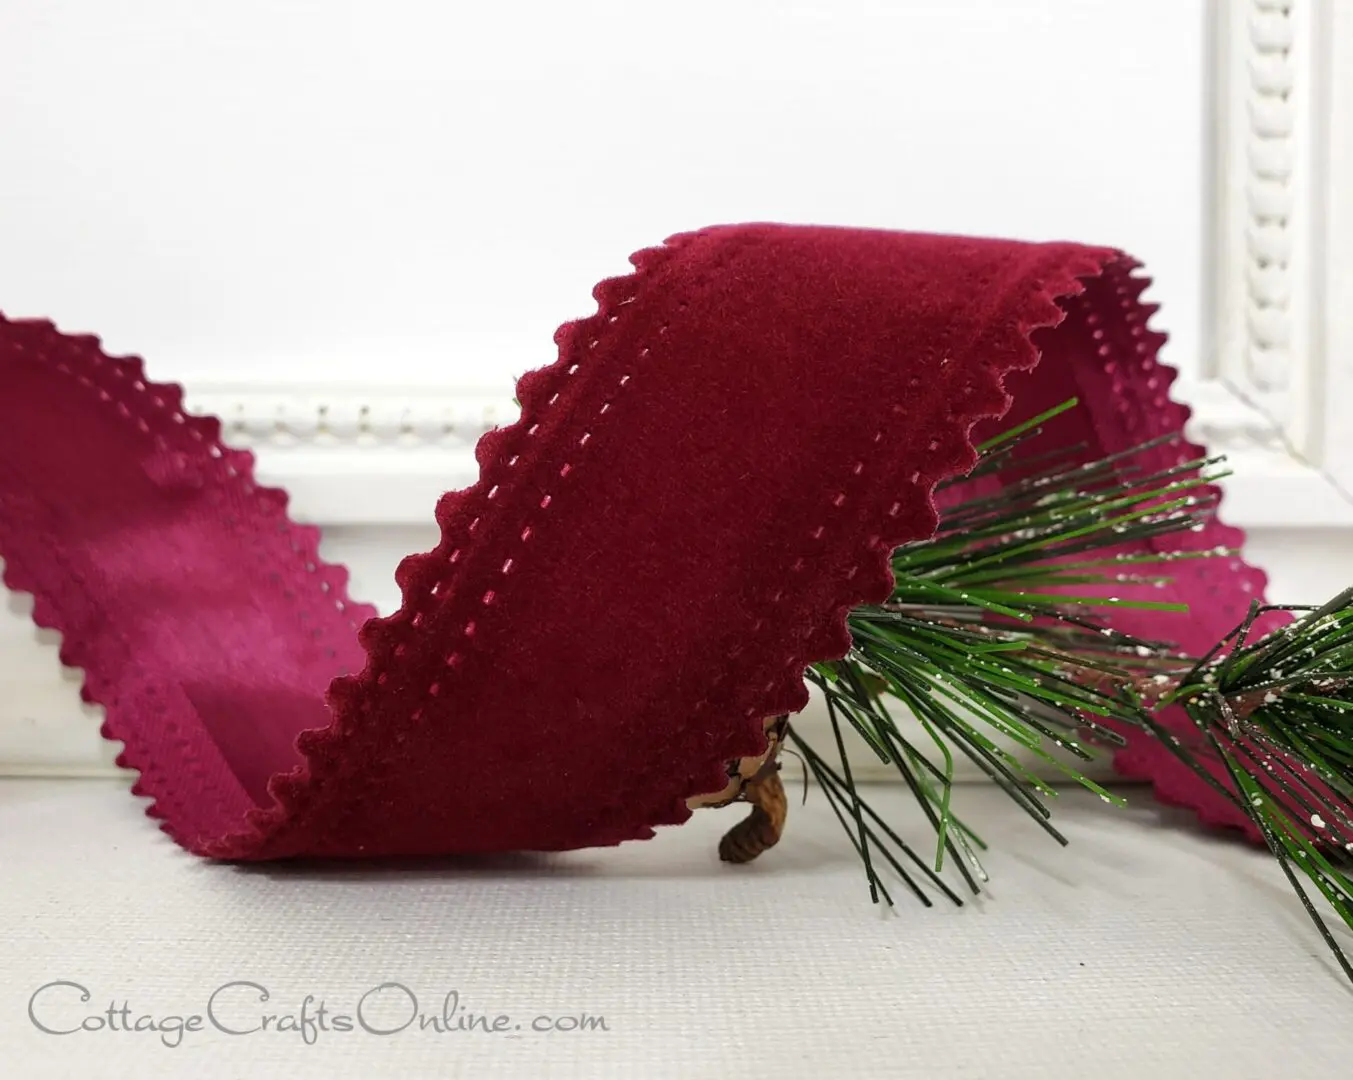 A new holiday ribbon featuring a burgundy velvet texture and a pine branch design.